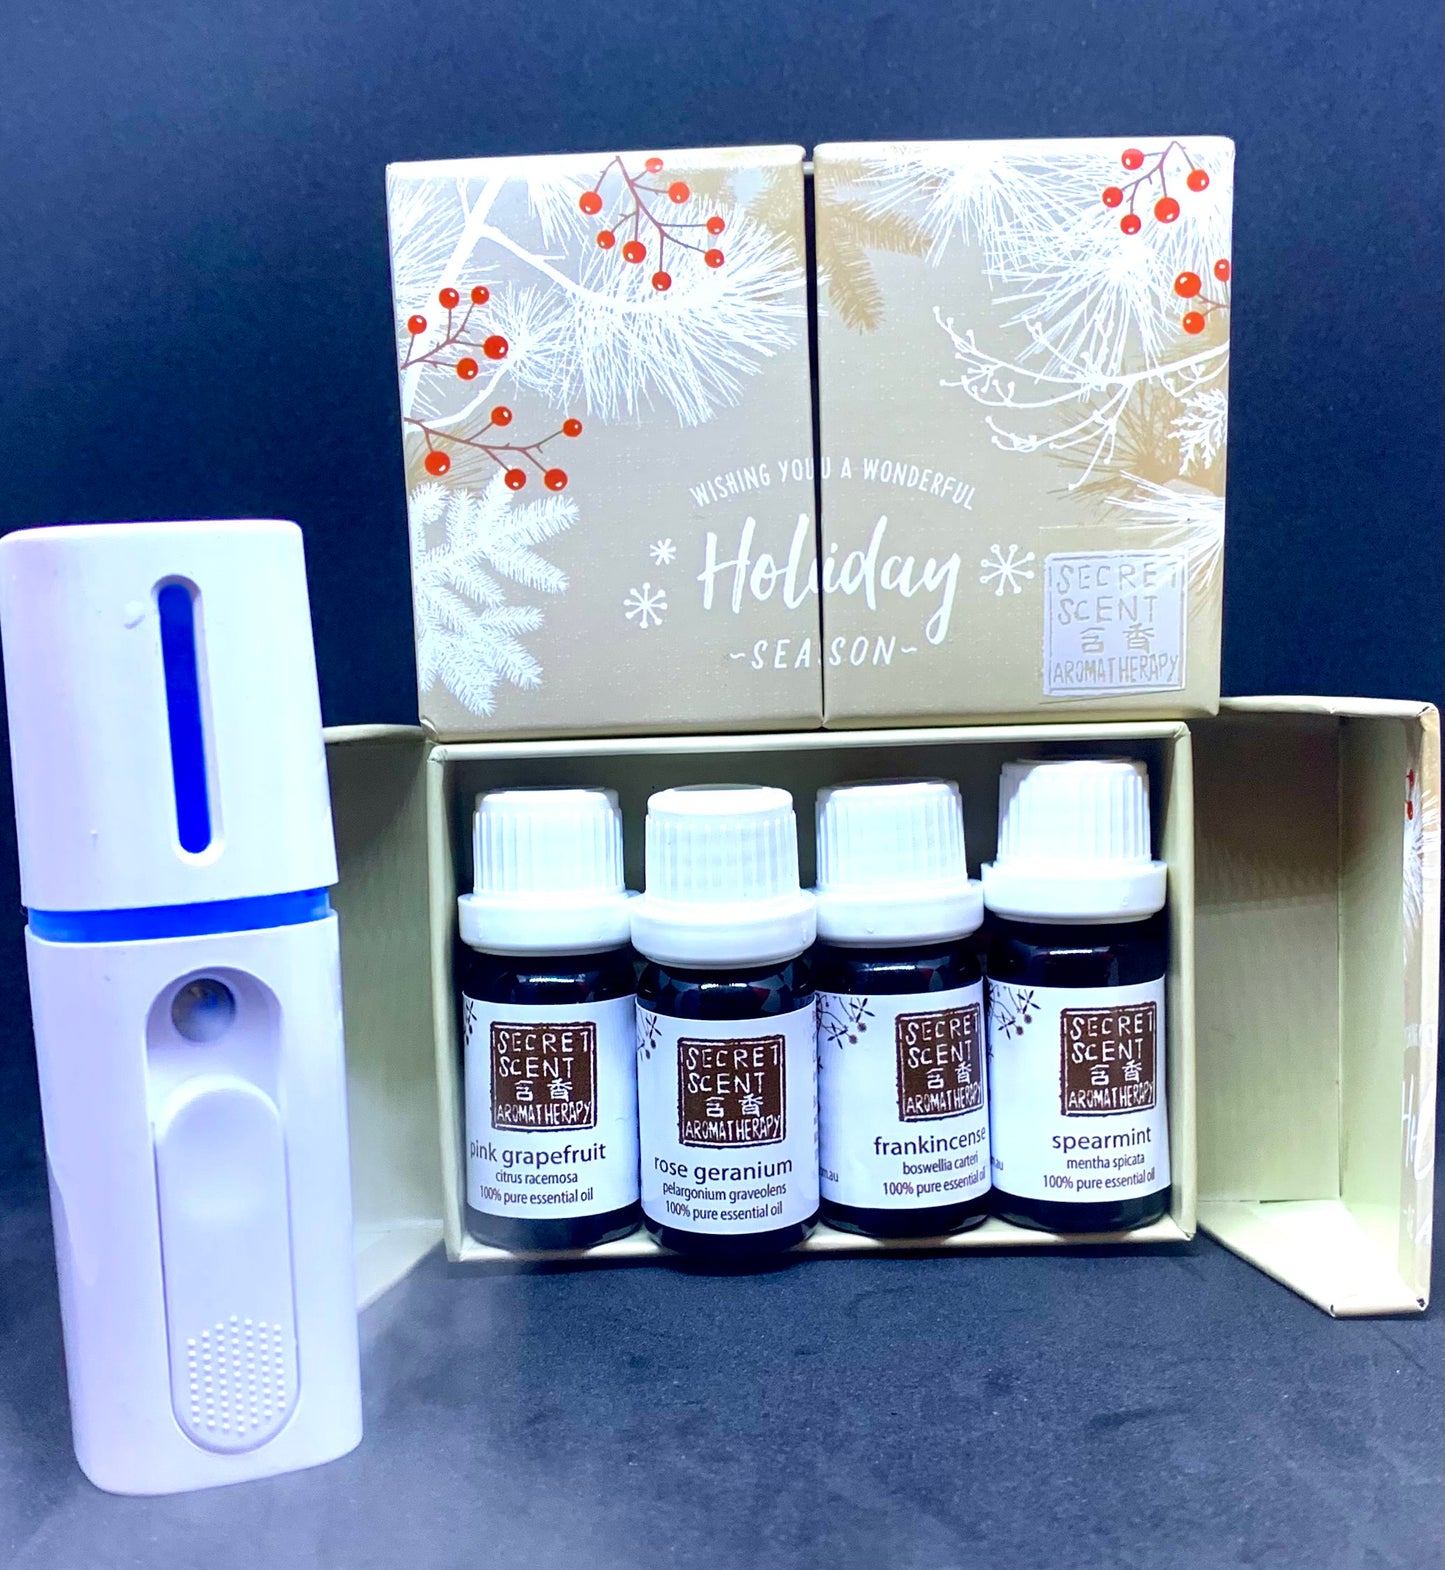 XMAS SPECIAL - any 4 essential oils or oil blends, mix & match your favourites in gift box PLUS a portable diffuser